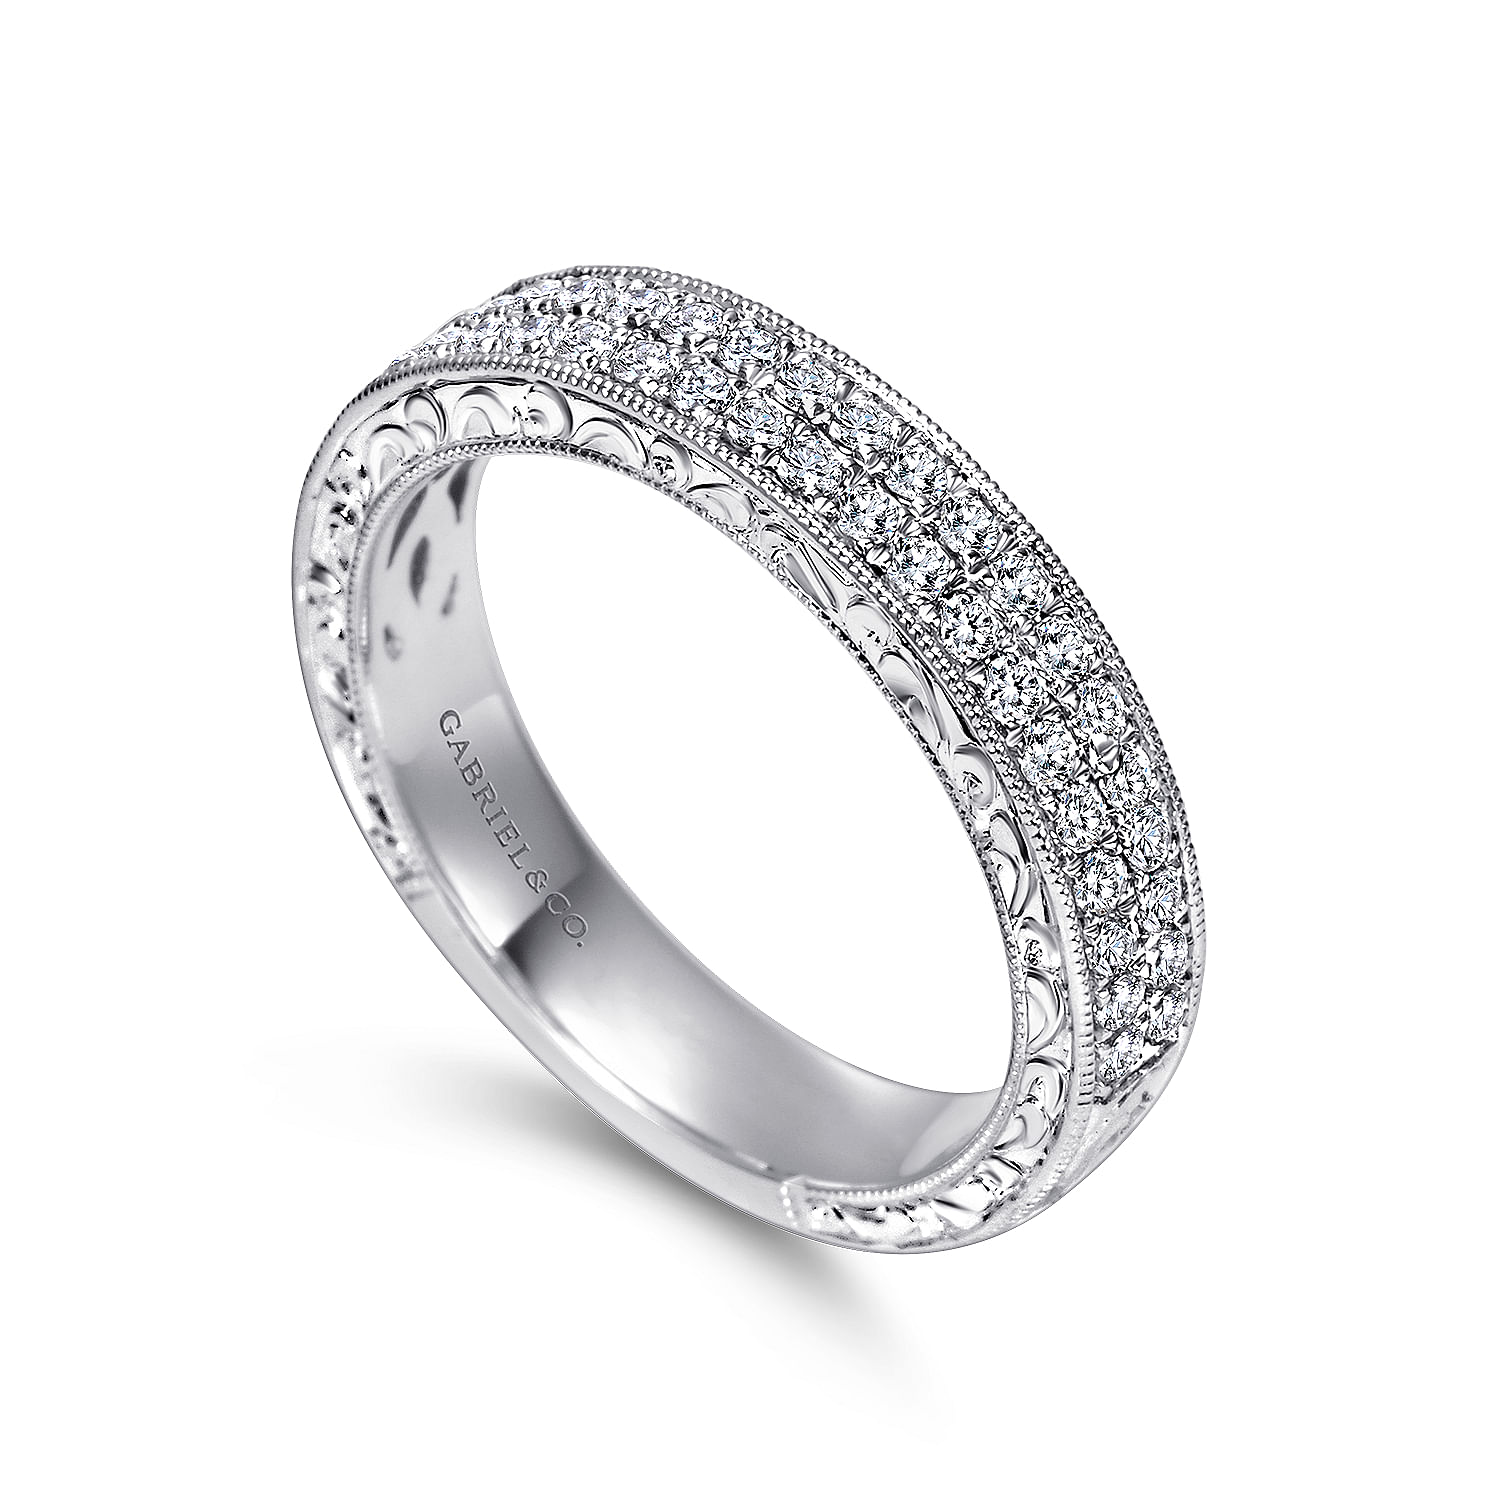 Vintage Inspired 14K White Gold Diamond Anniversary Band with Hand Engraving